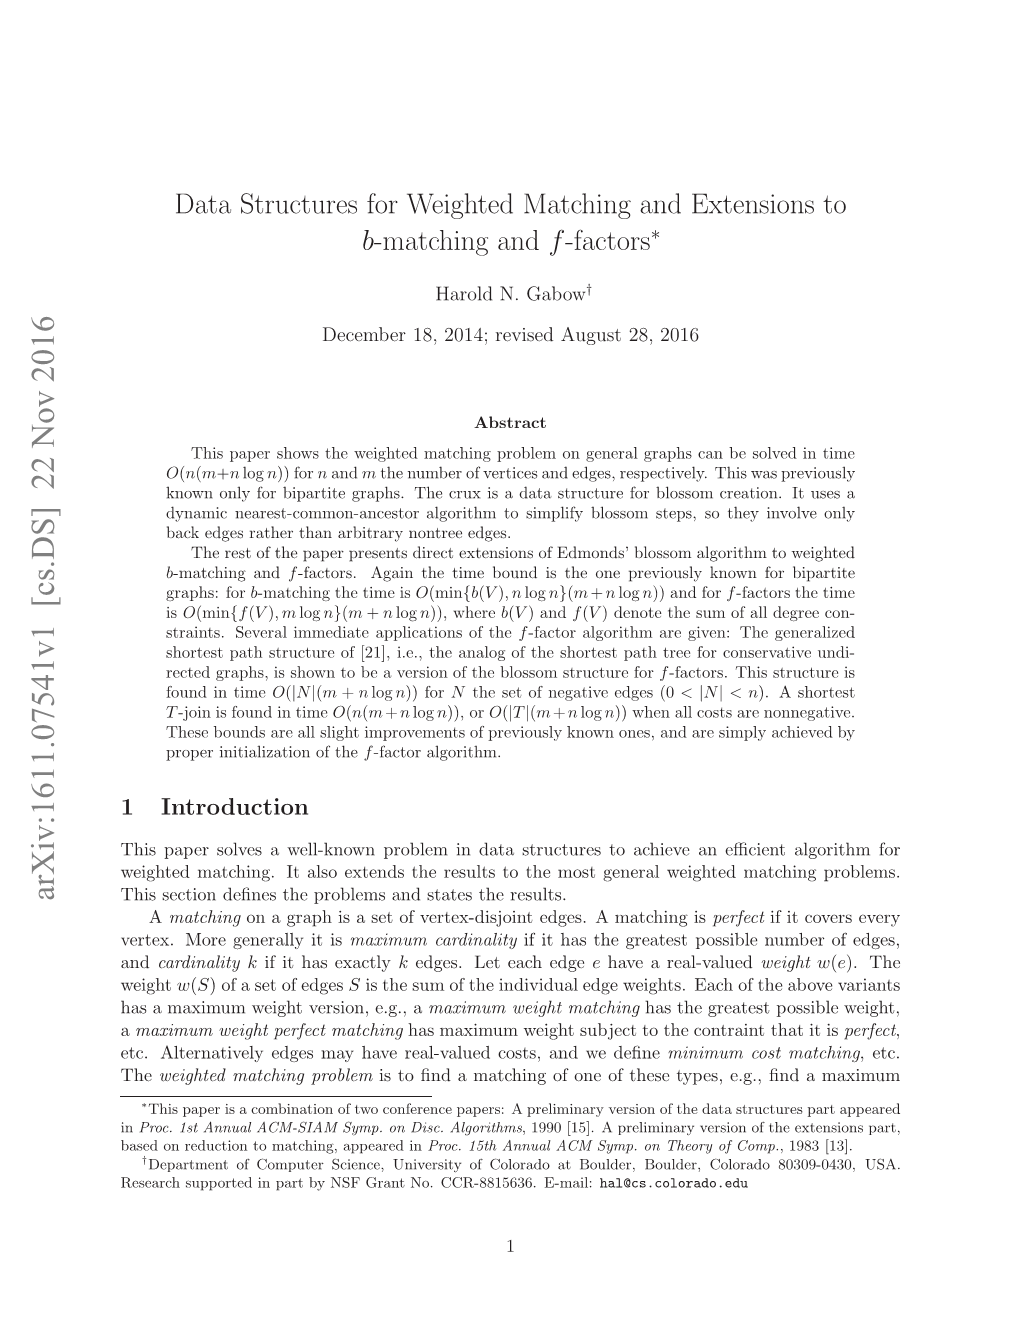 Data Structures for Weighted Matching and Extensions to $ B $-Matching